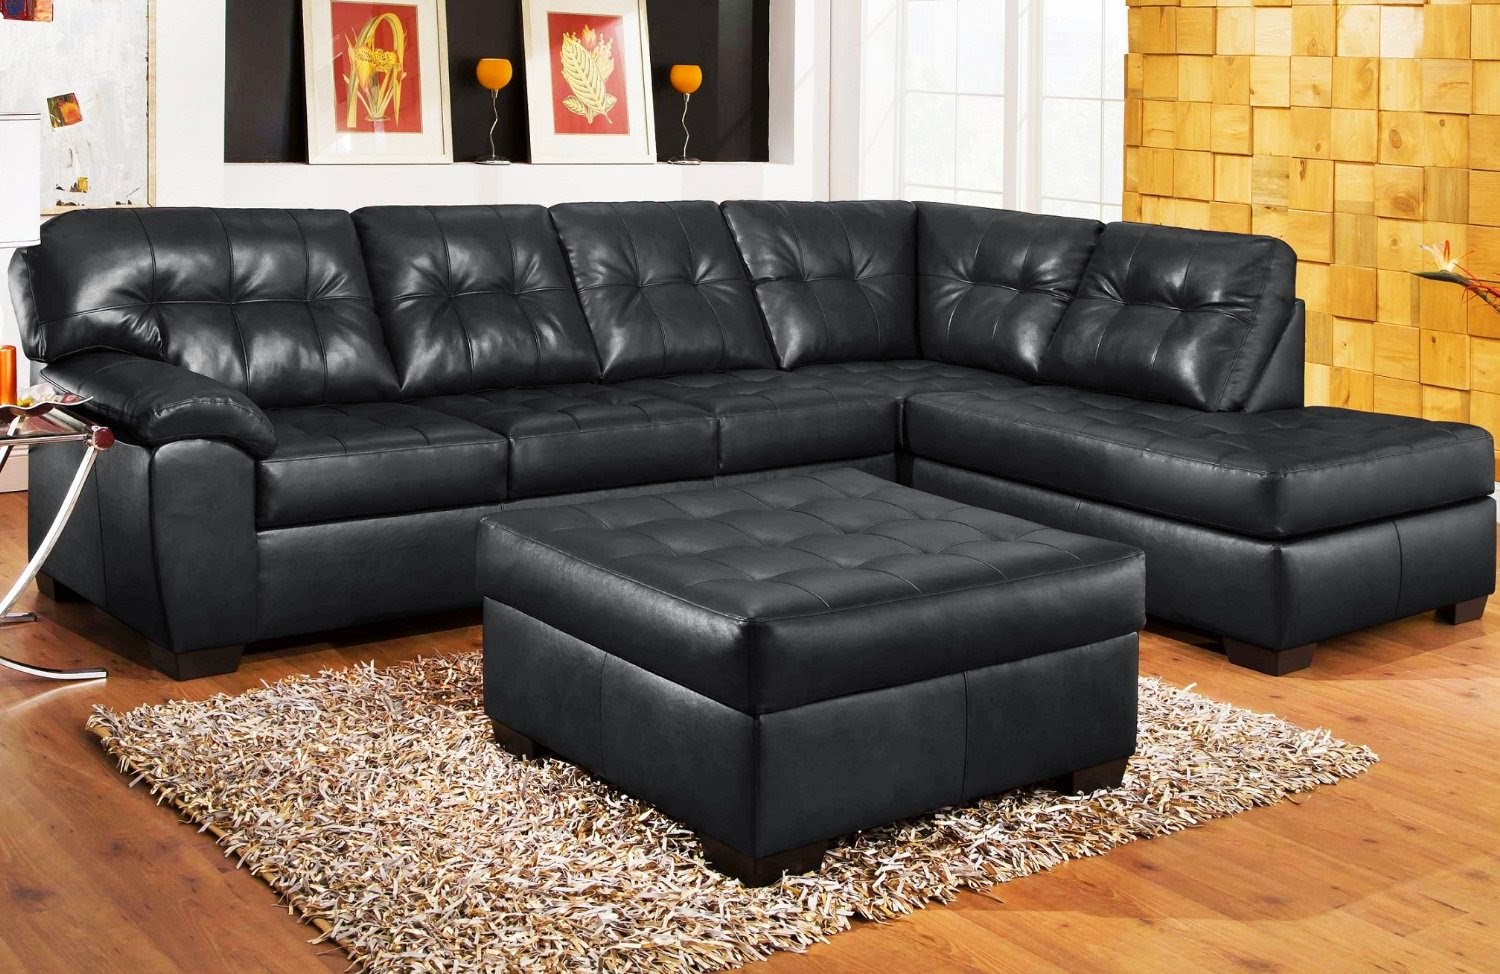 Black Couch Black Sectional Couch